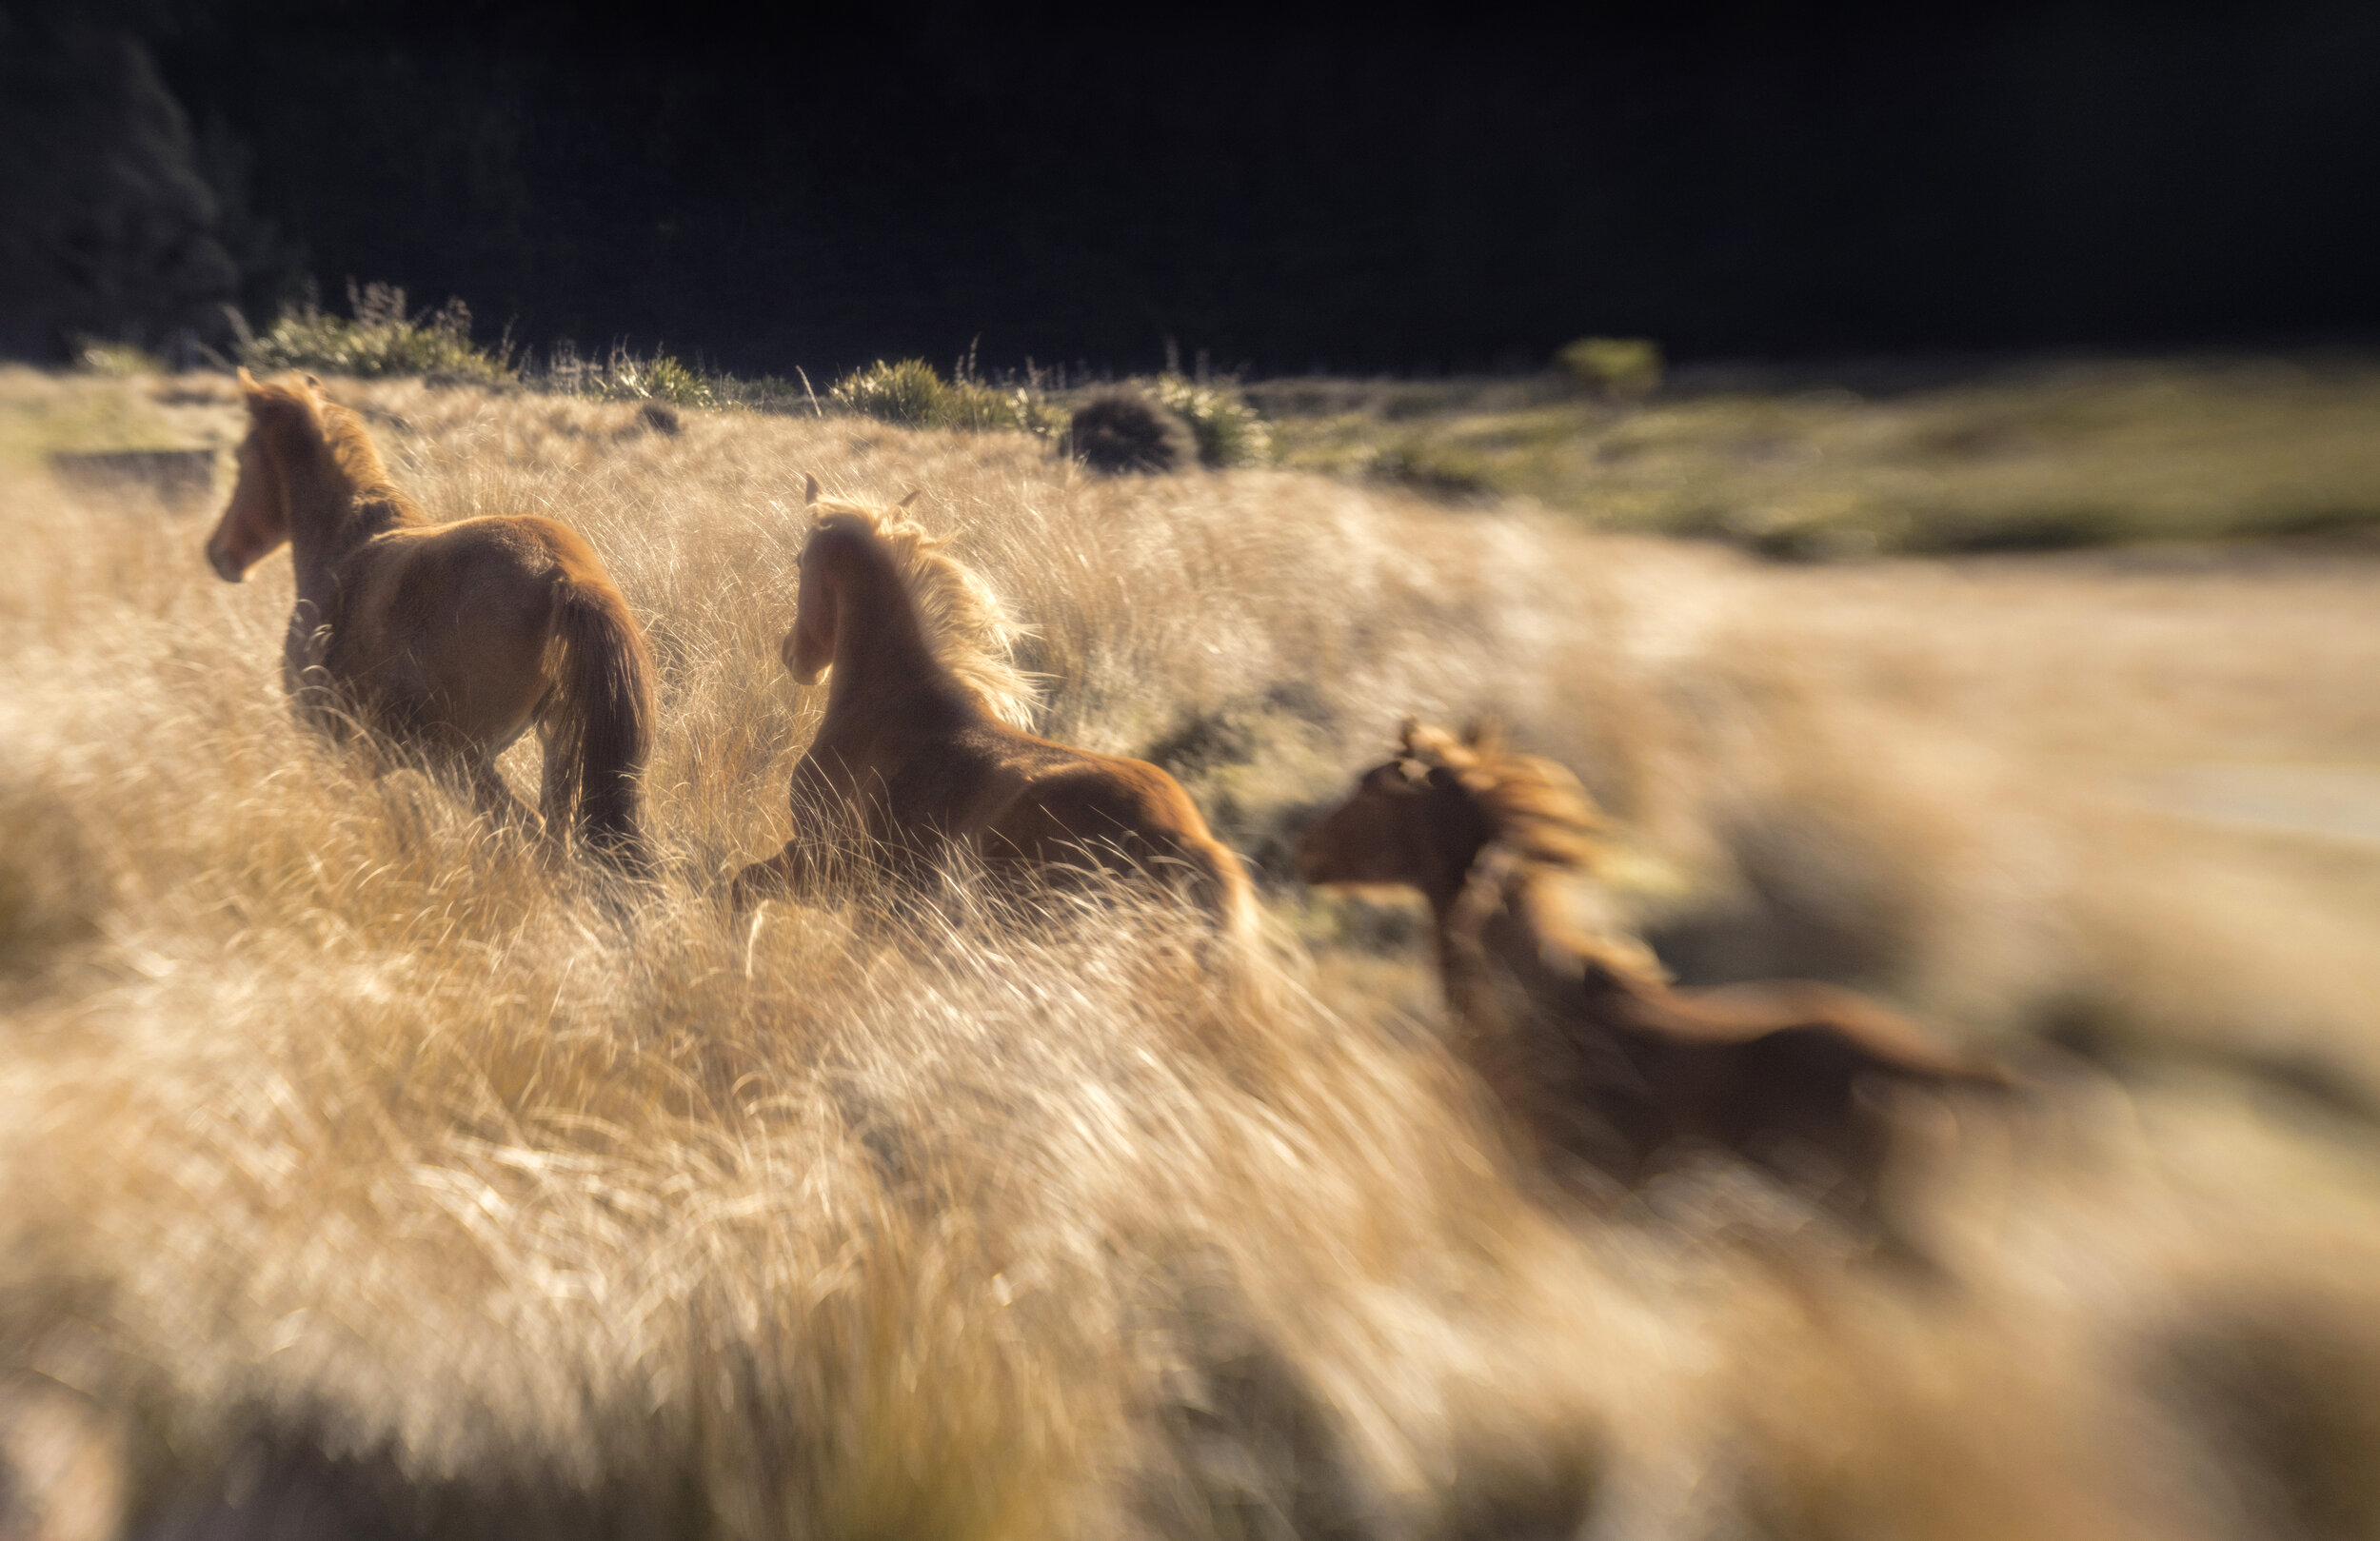 ESTHER BUNNING, KAIMANAWA HORSES, FROM THE ARTFUL FILLY, NIKON D850, LENSBABY, 50MM, 1/1600S, F/2.5, ISO 250